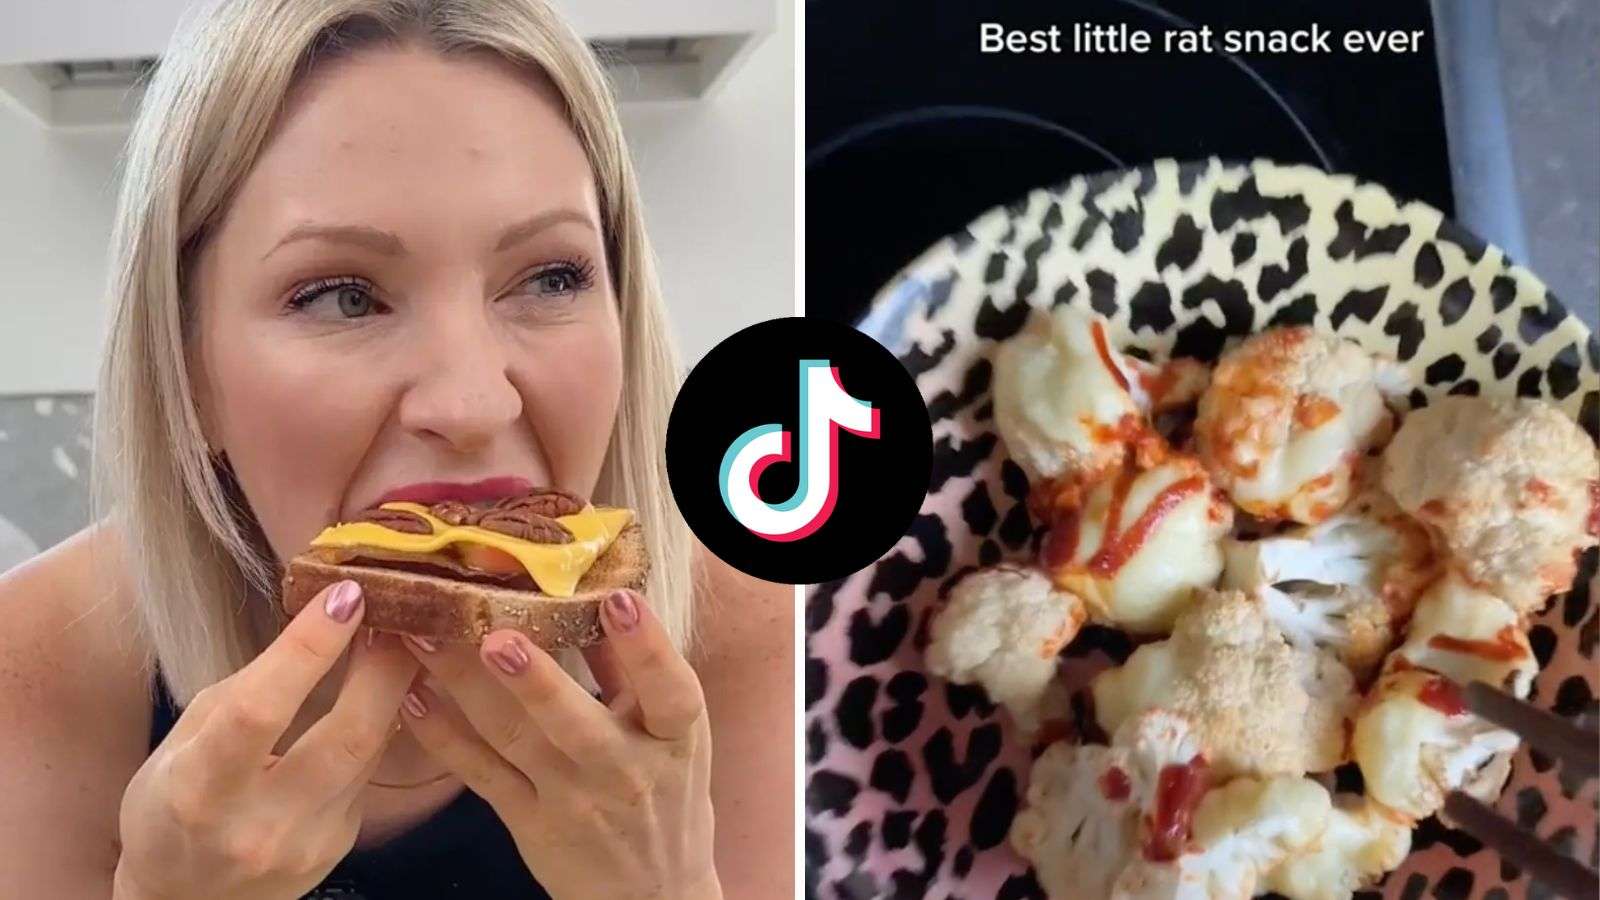 What is the ‘rat snacking’ trend on TikTok?